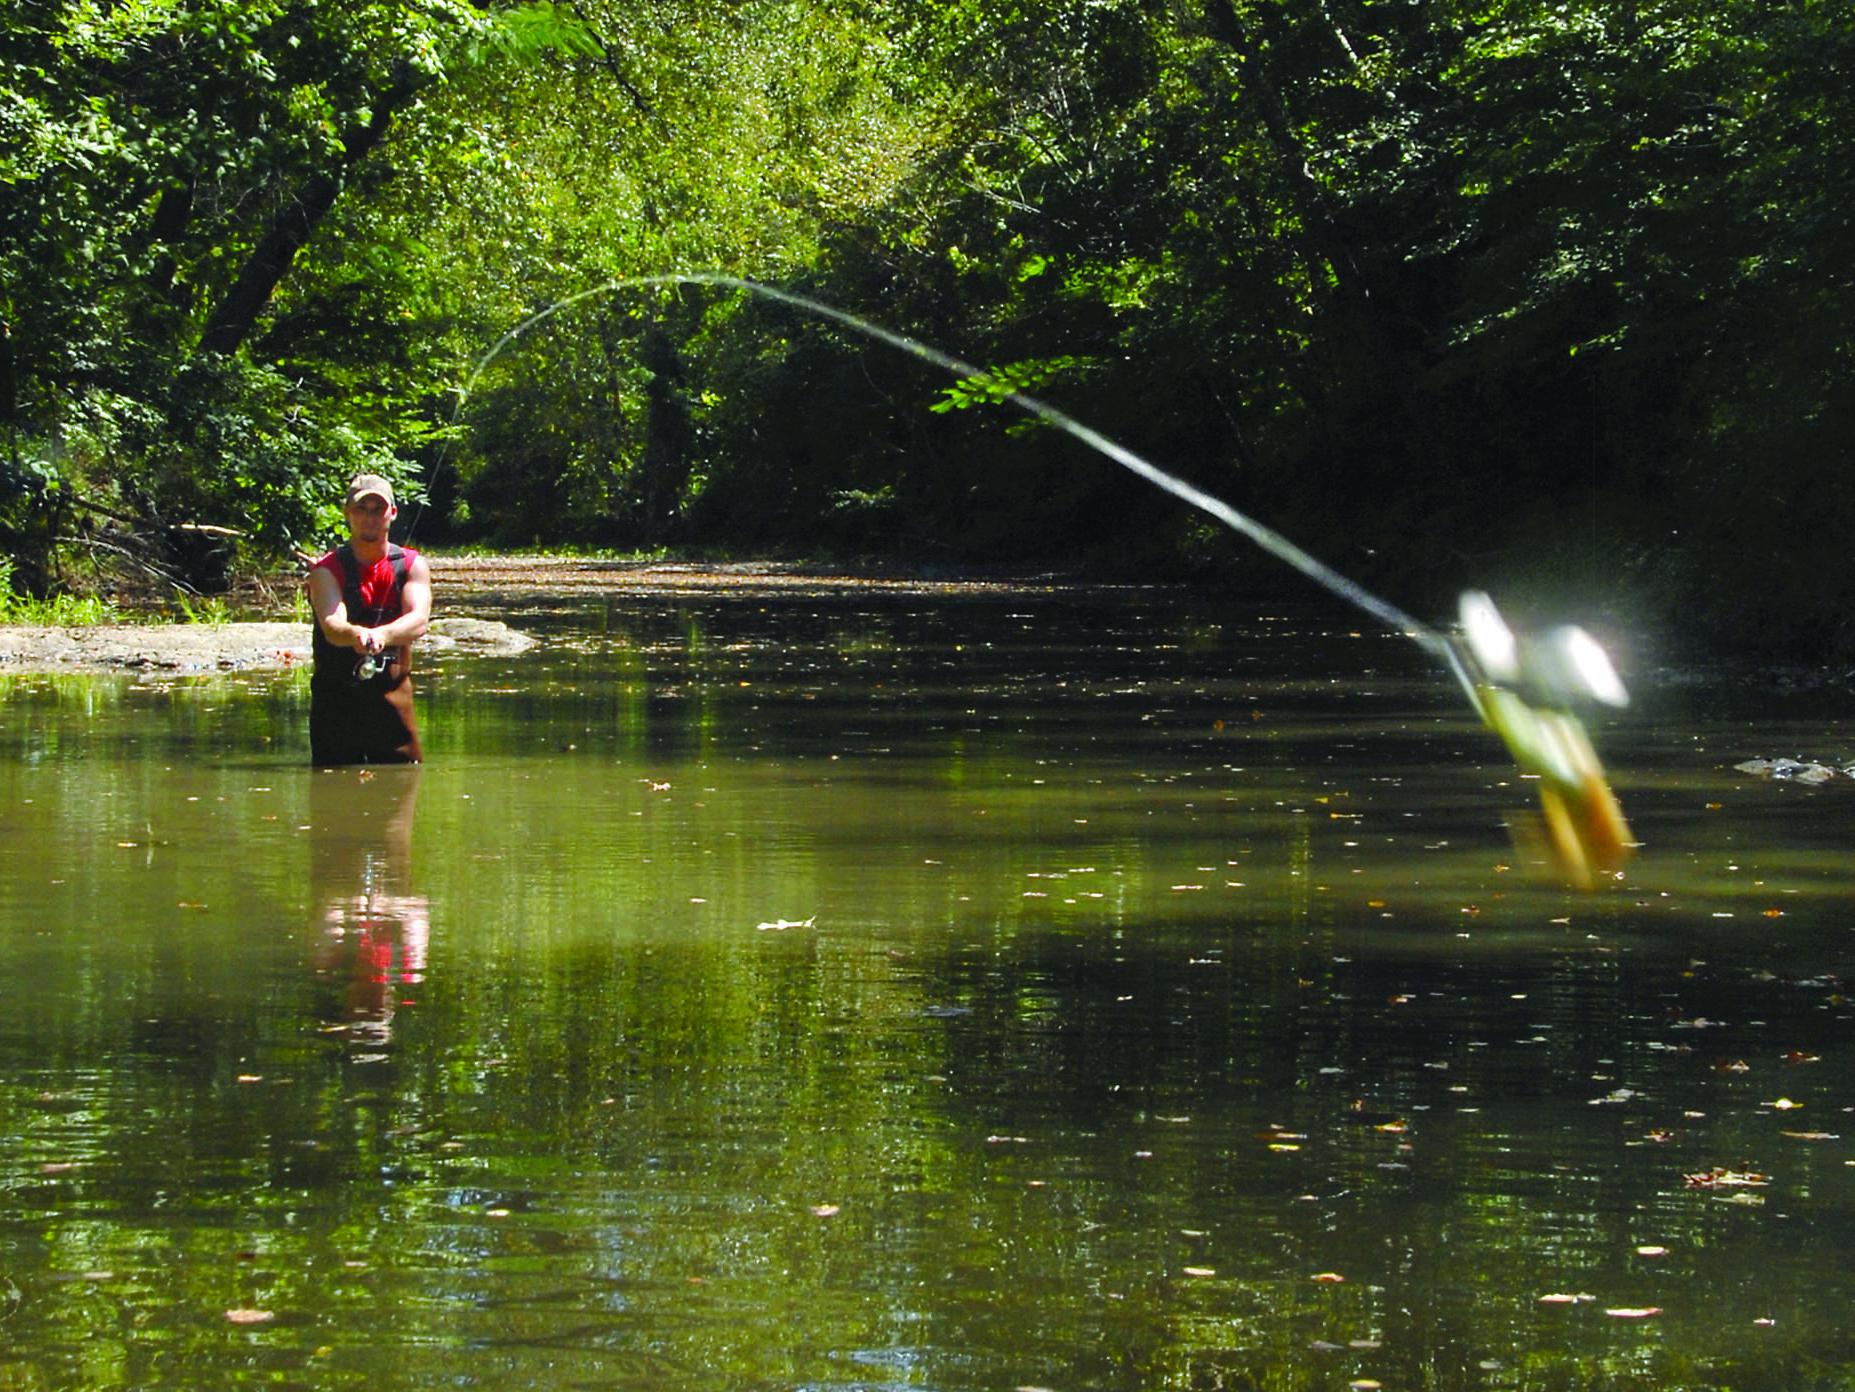 A fisherman in rubber waders stands in a small, quiet stream and casts a lure toward the viewer.